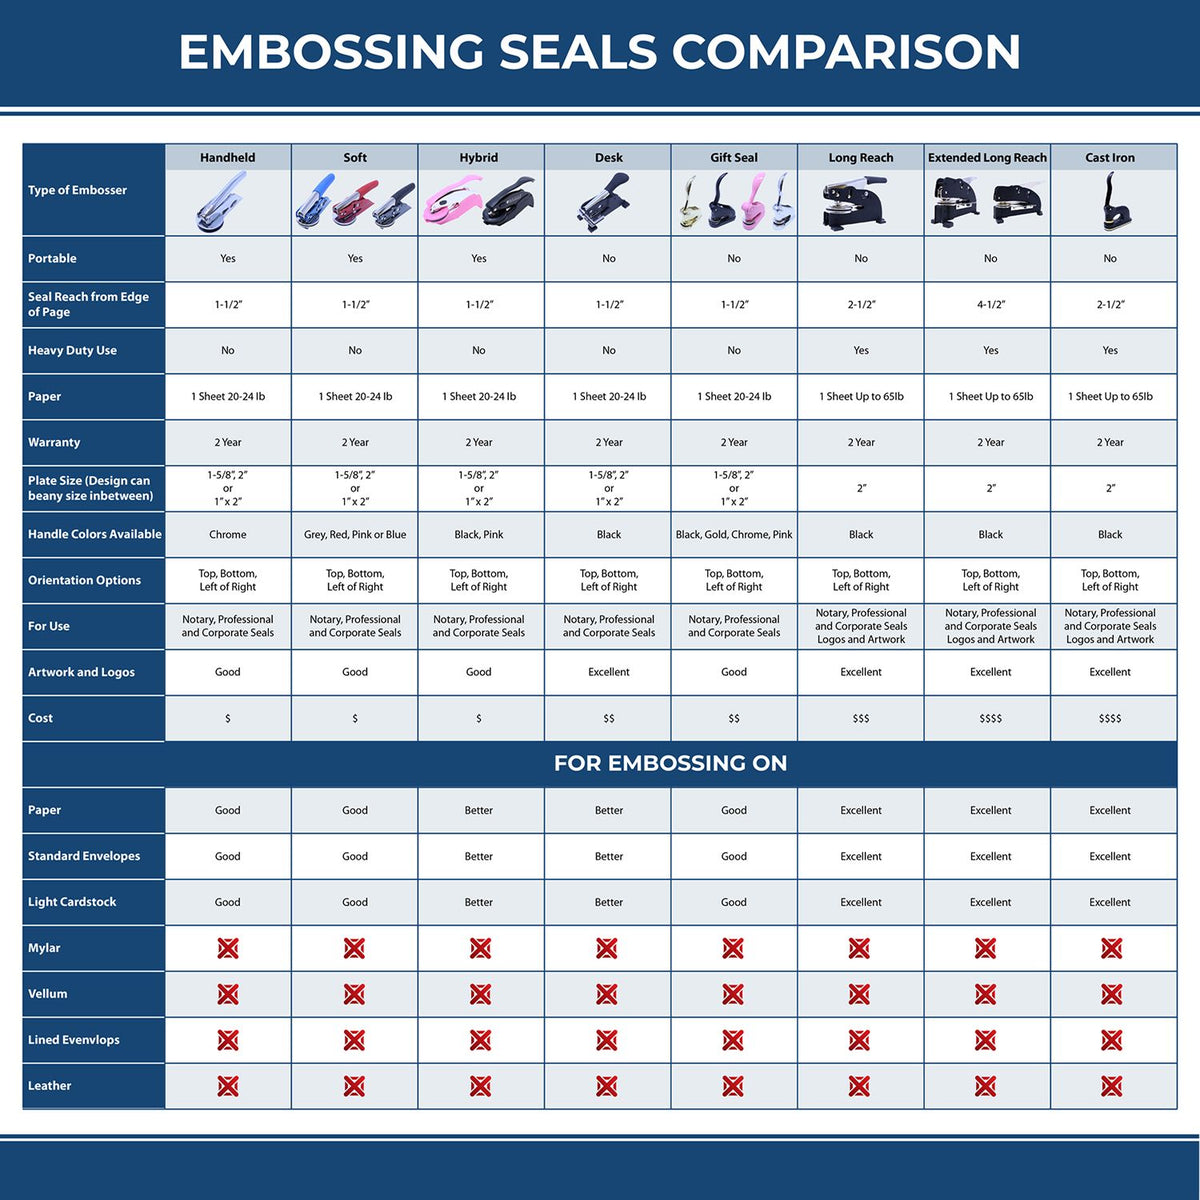 A comparison chart for the different types of mount models available for the Long Reach Massachusetts PE Seal.